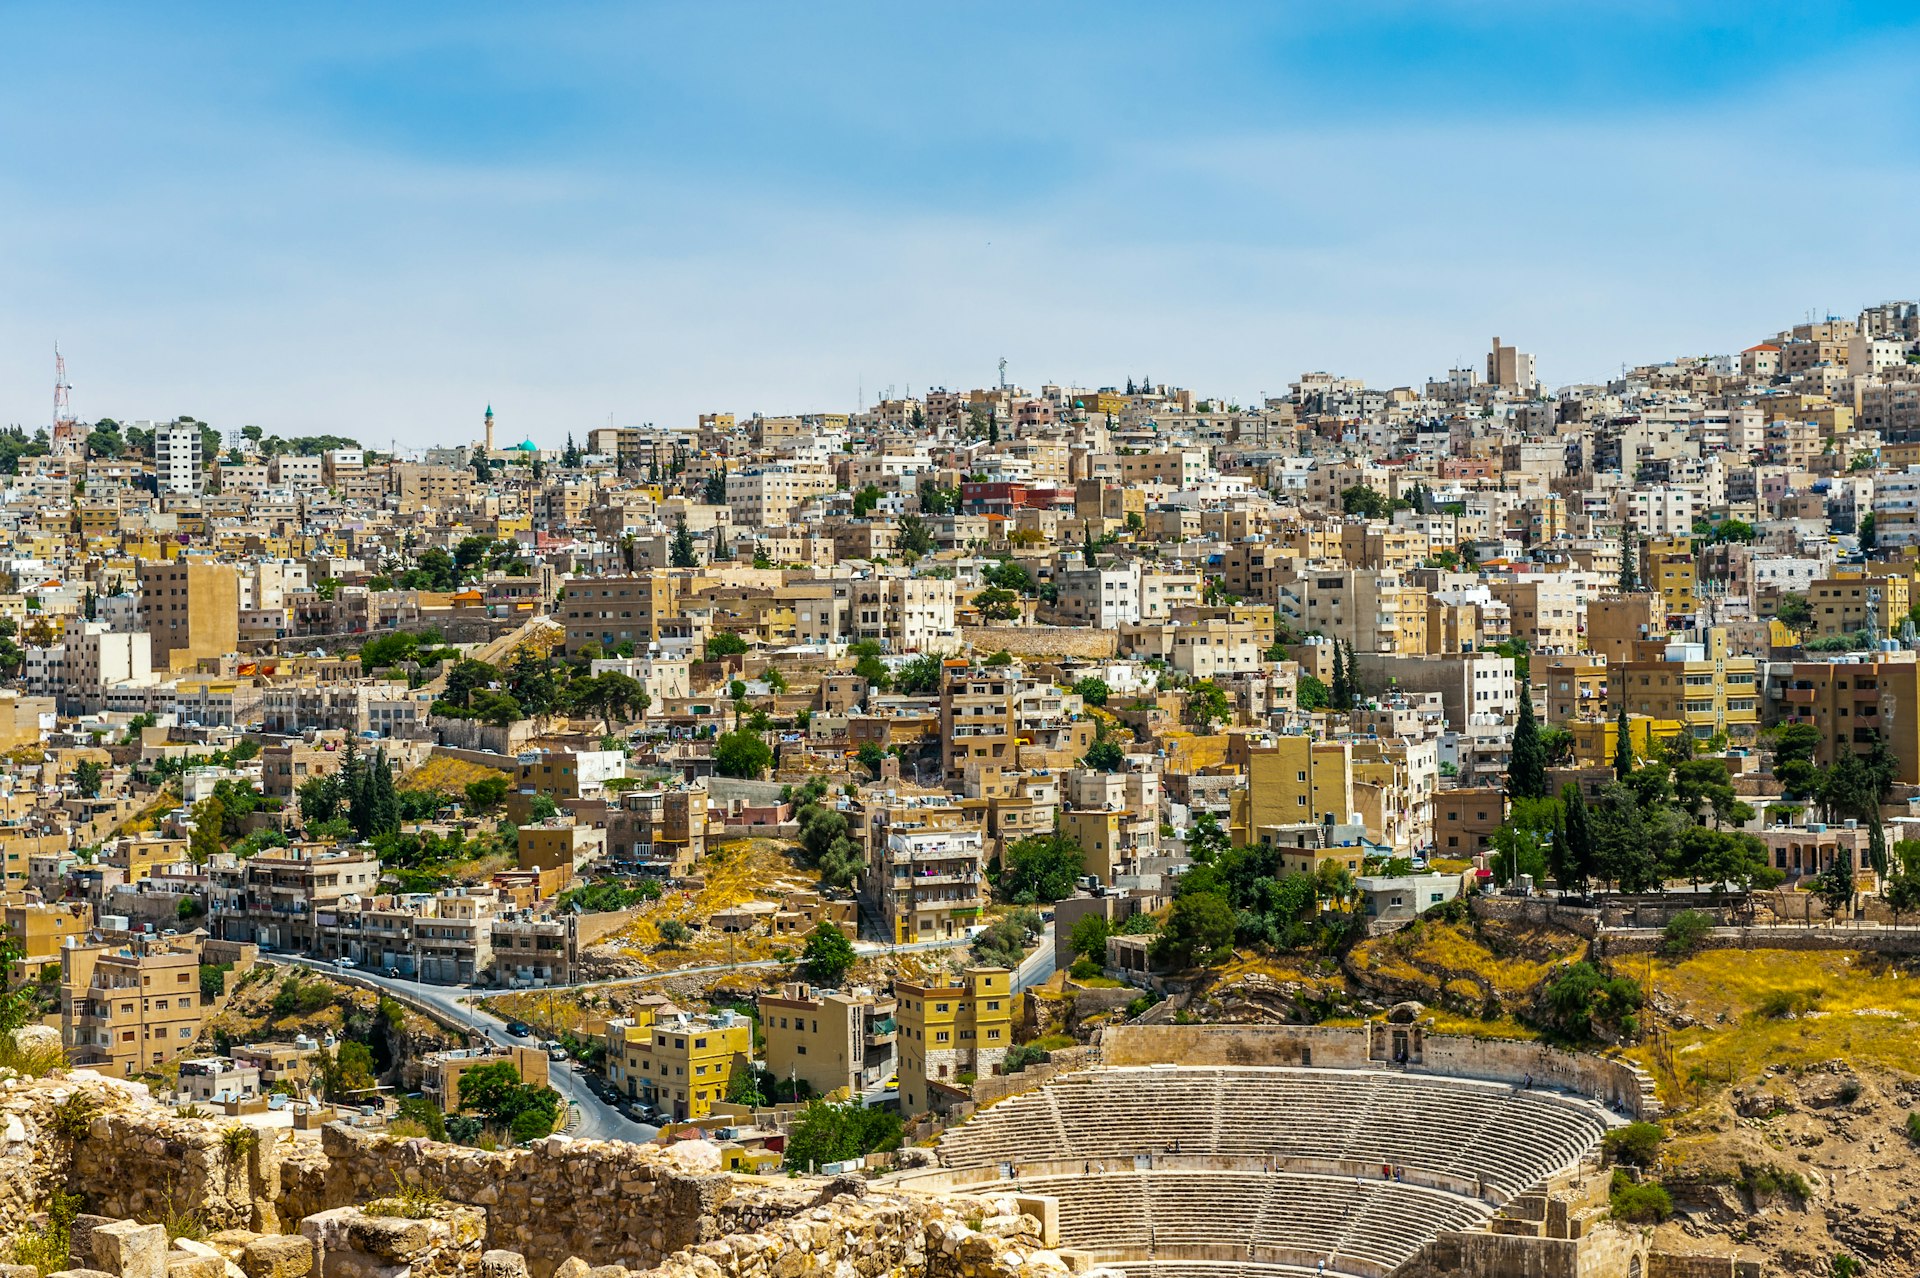 Architecture of Amman, the capital and the largest city of Jordan 